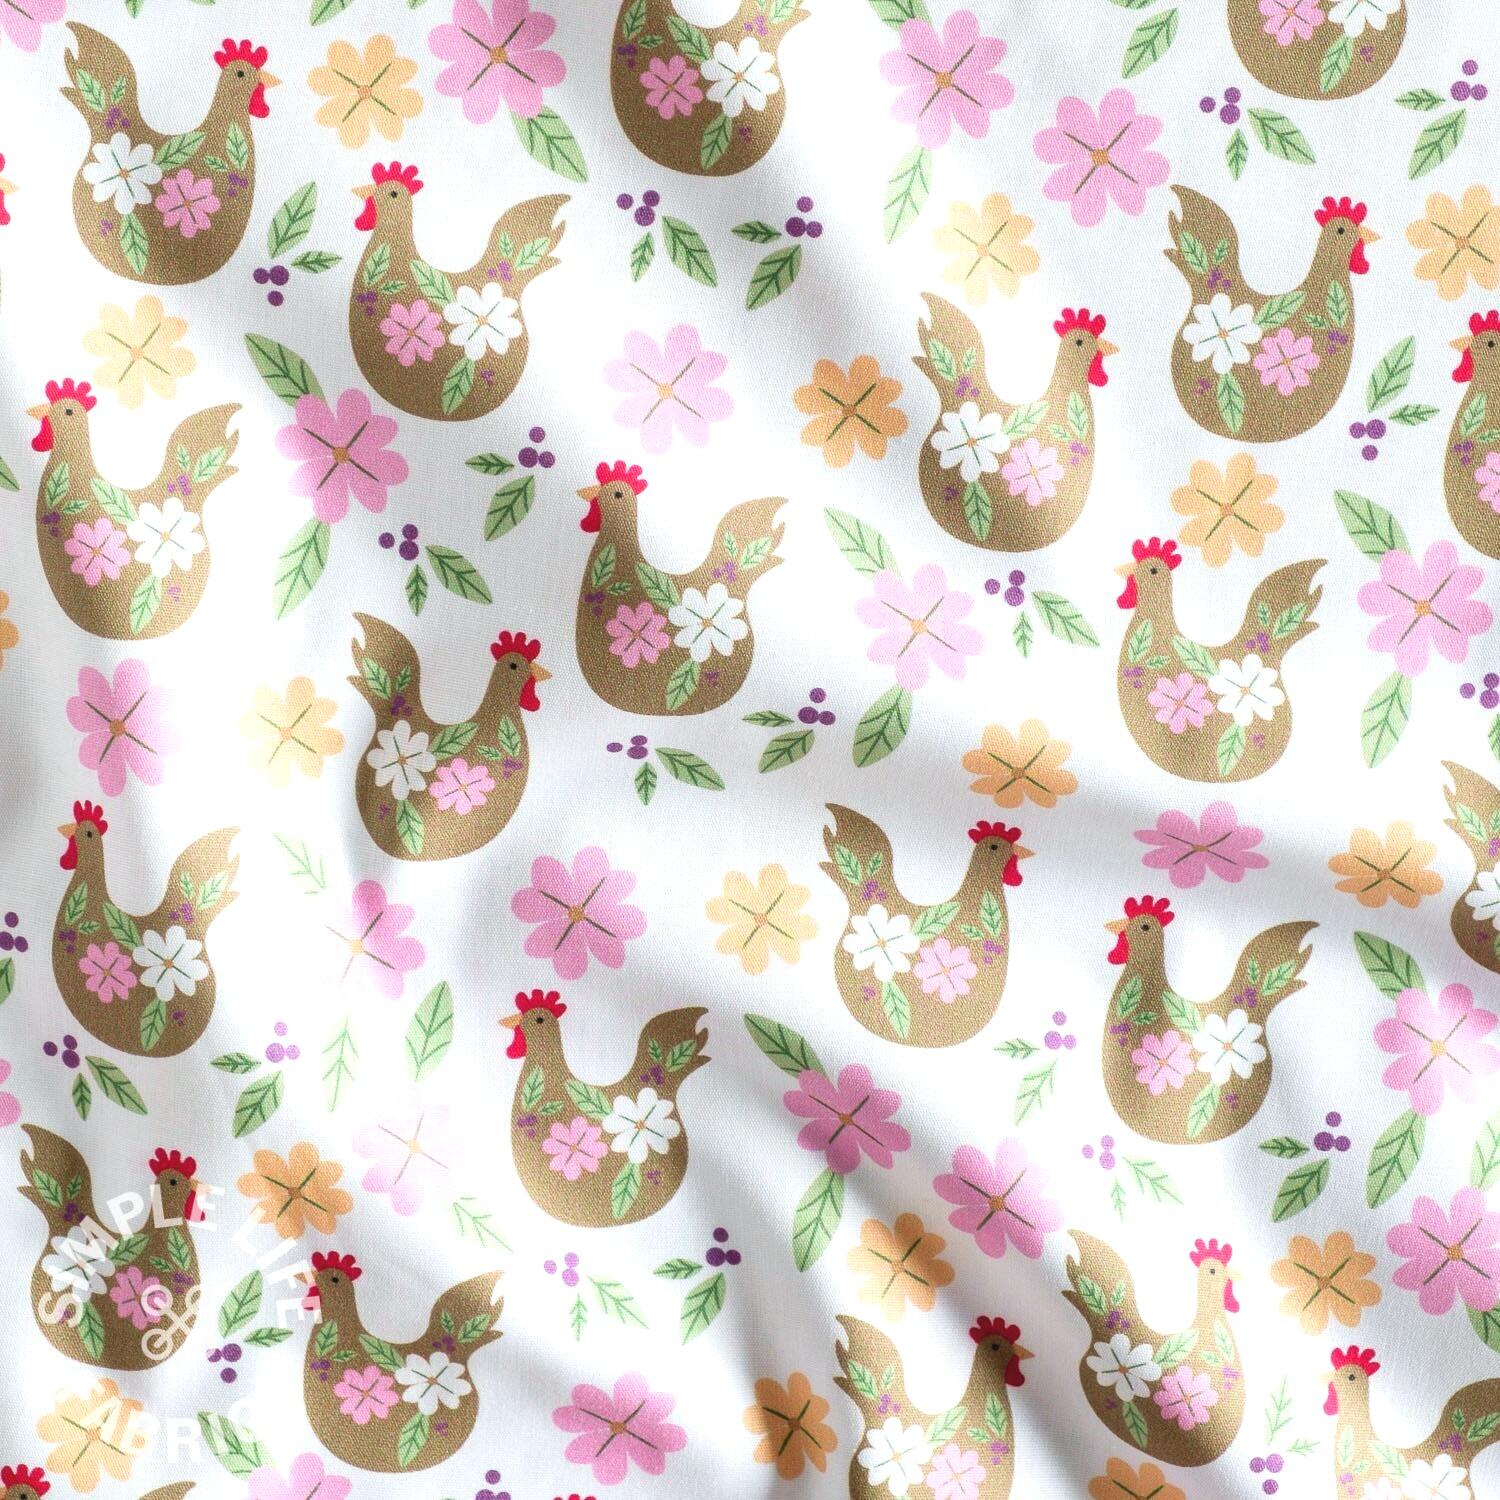 Chickens hens cotton fabric